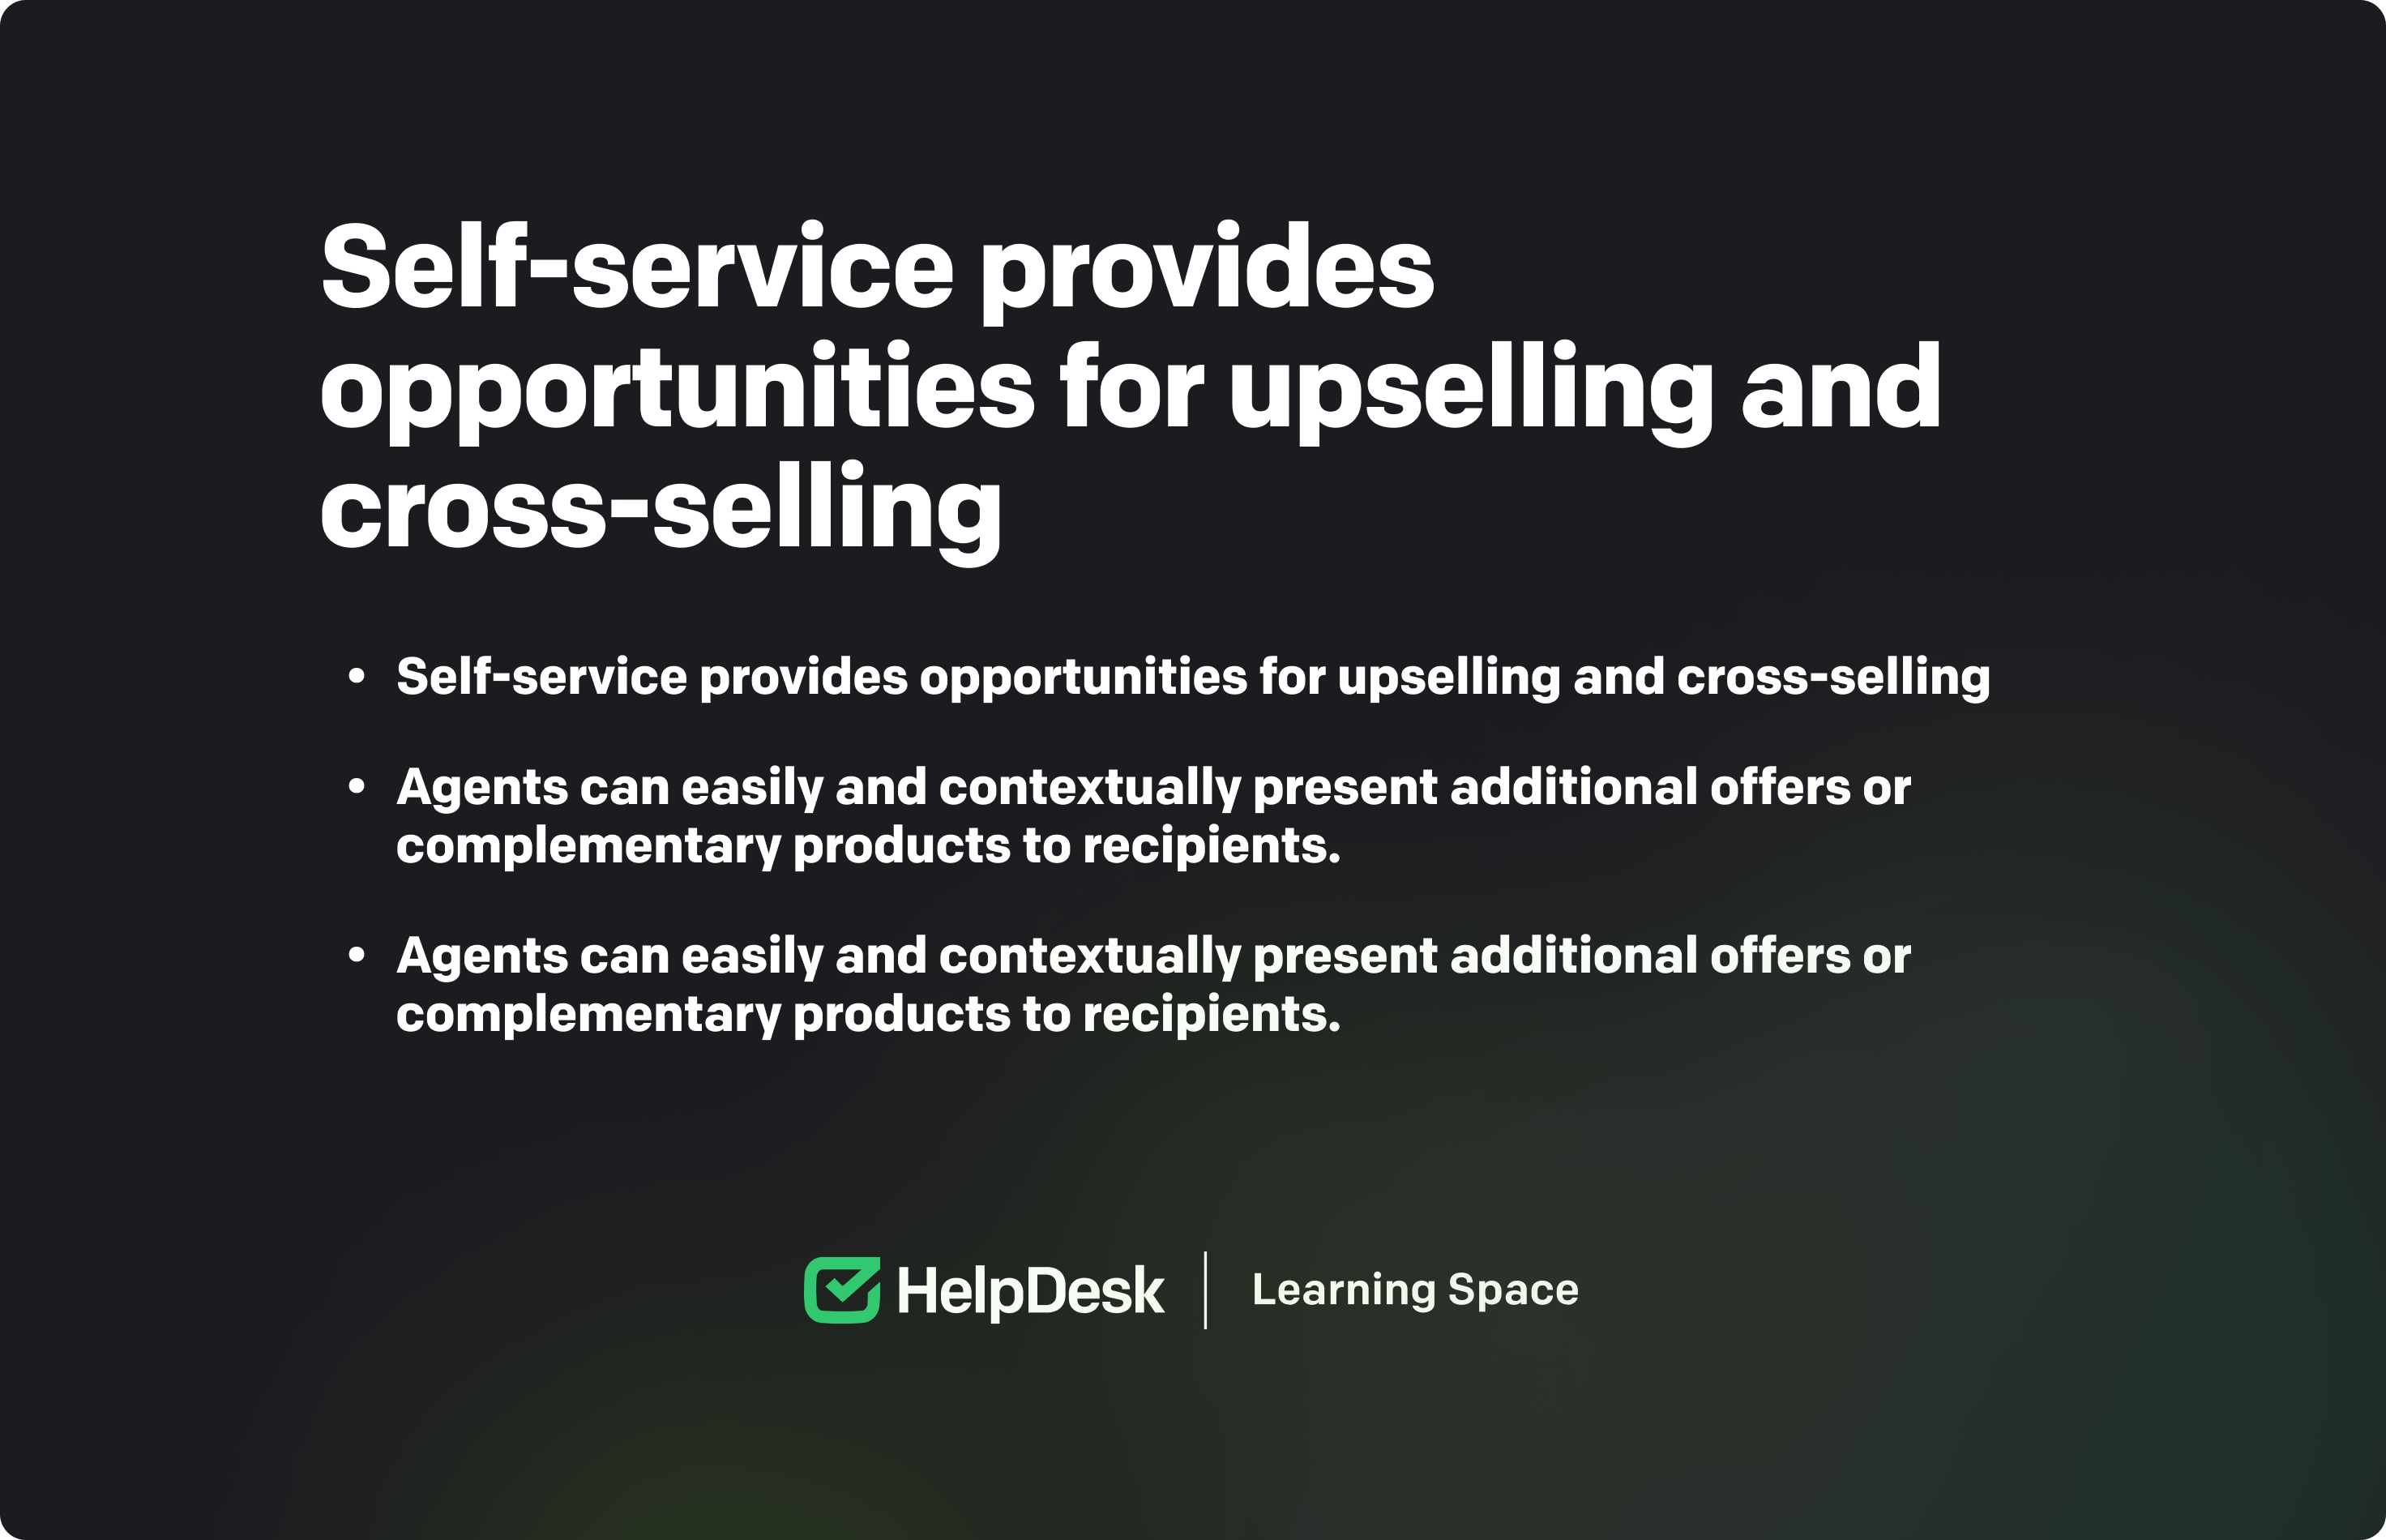 Self-service benefits for support teams: opportunities for upselling and cross-selling